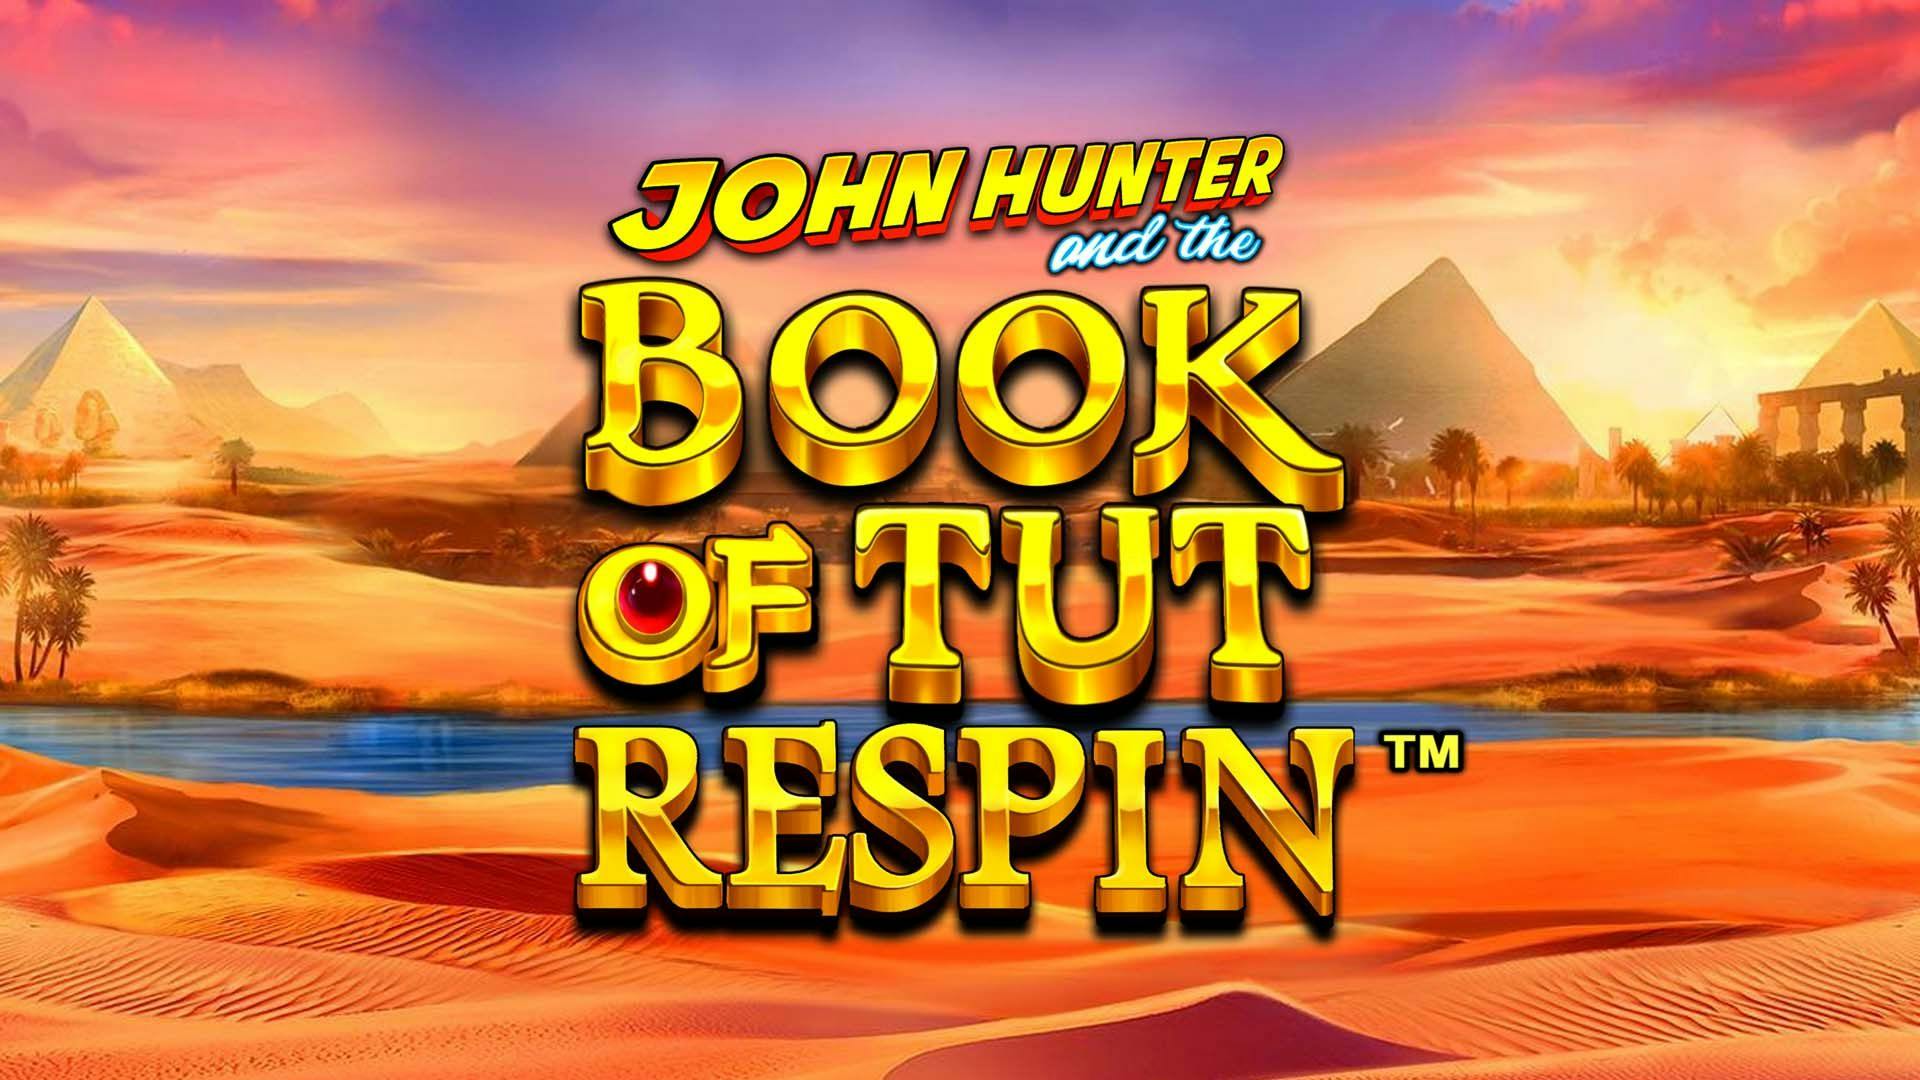 John Hunter And The Book Of Tut Respin Slot Machine Online Free Game Play